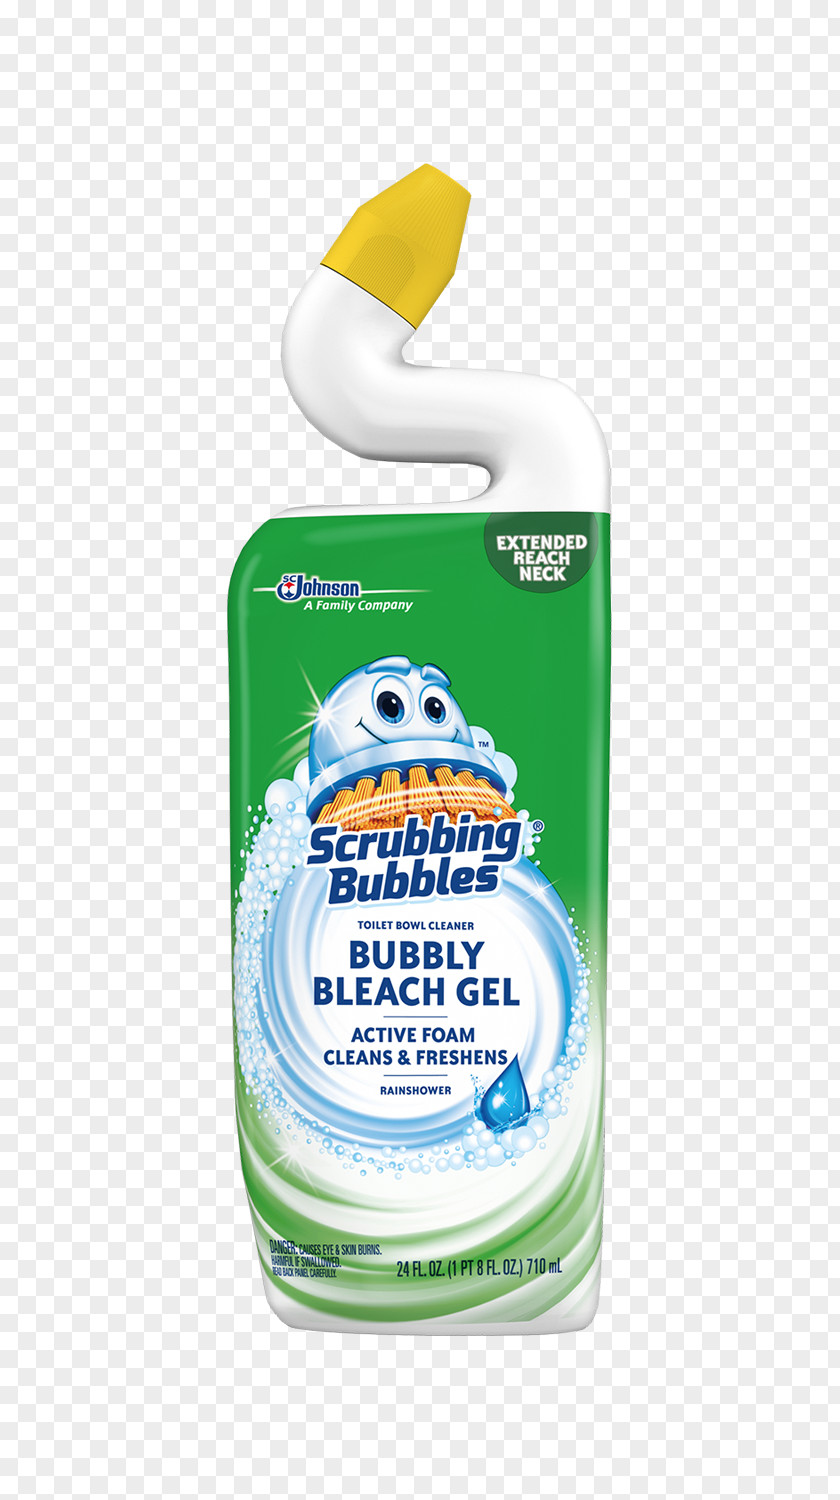 Bleach Cleaner Scrubbing Bubbles Bubbly Gel Toilet Bowl Cleaning Fresh 2 Count 2.68 Ounce NEW 70400 Cleaners Stamp PNG